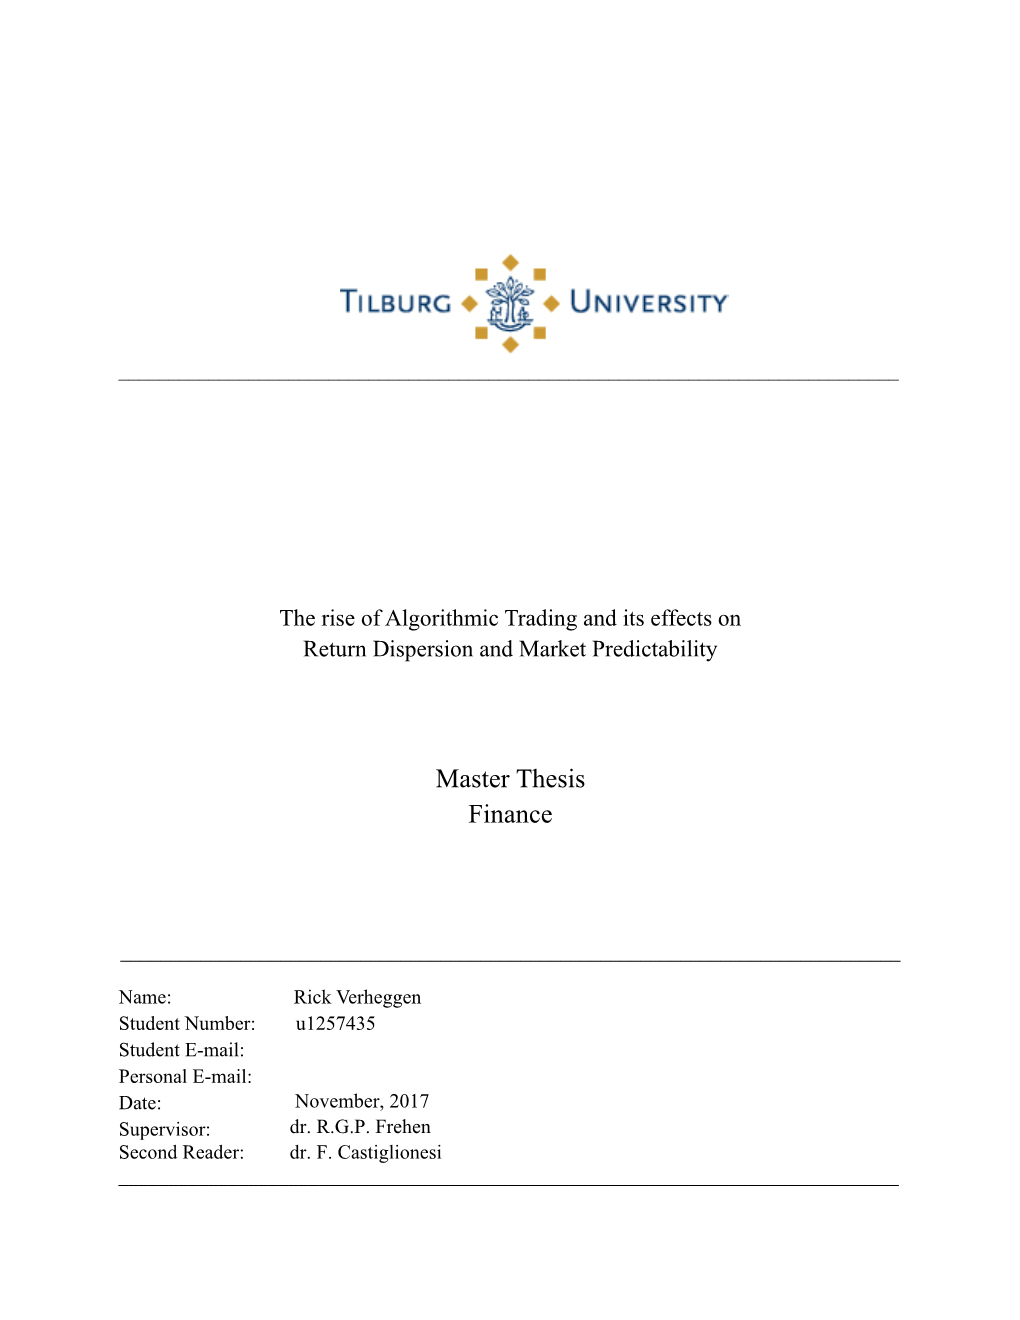 The Rise of Algorithmic Trading and Its Effects on Return Dispersion and Market Predictability